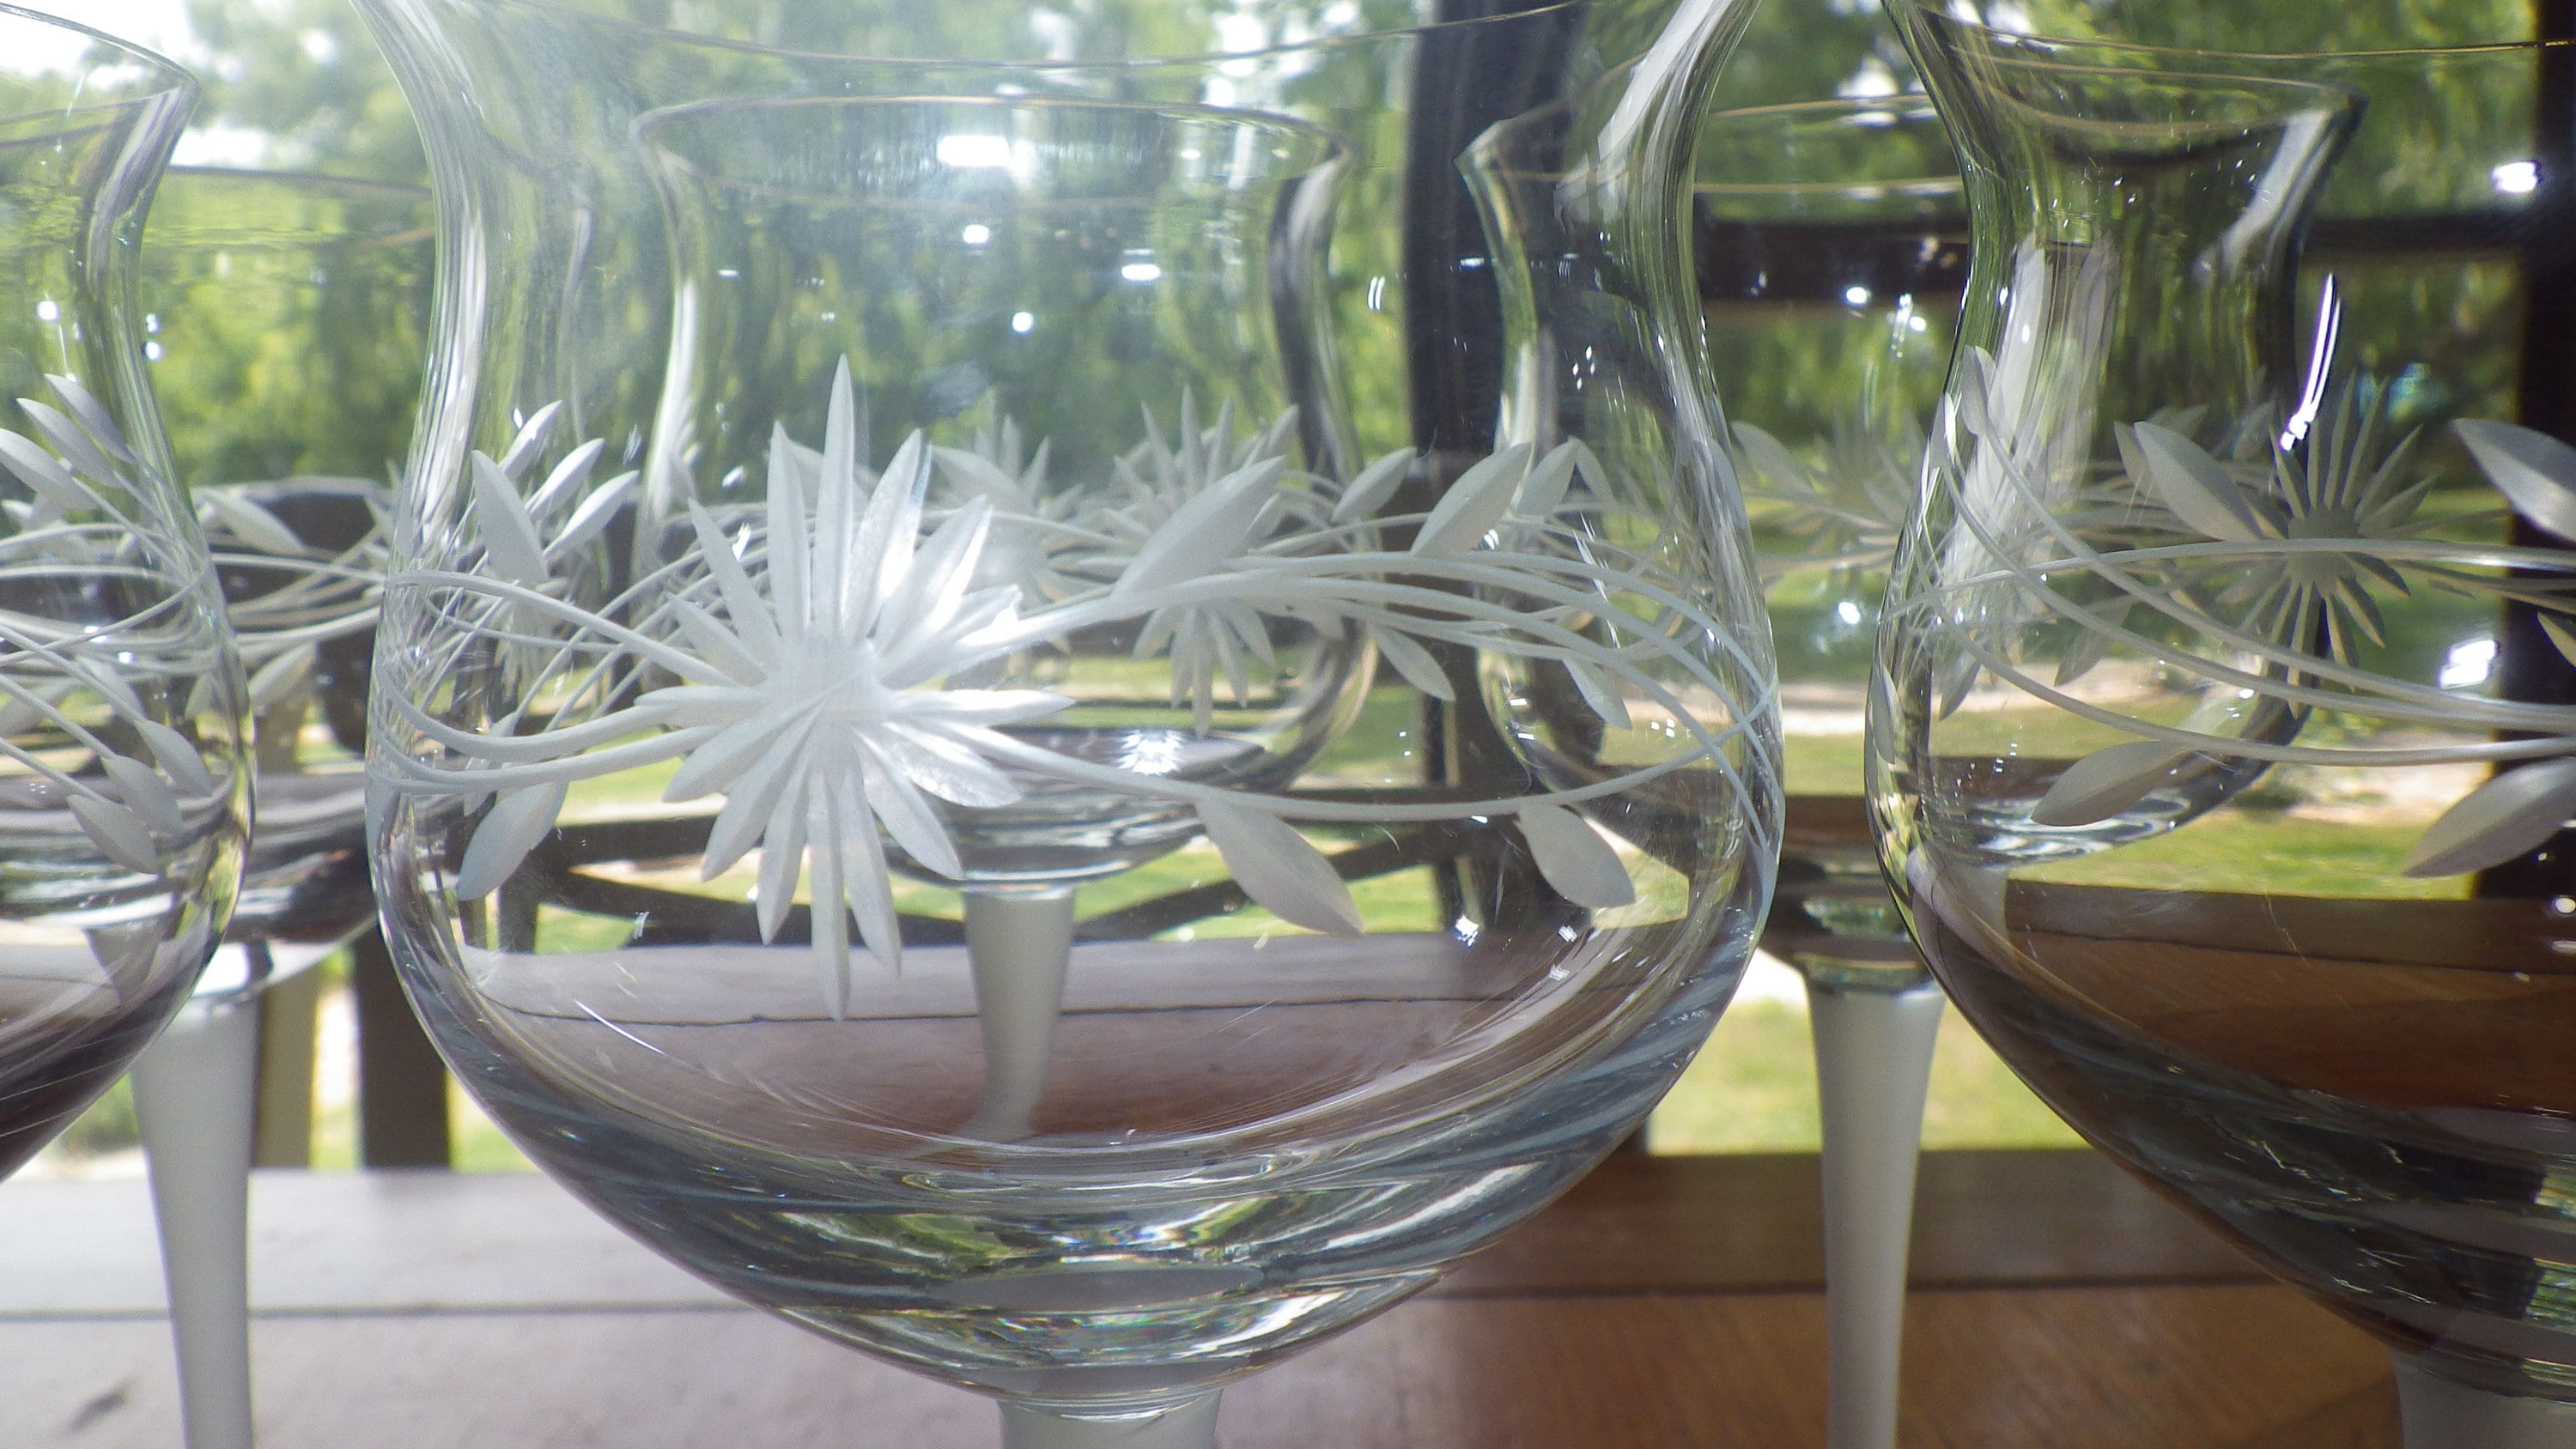 2 Wine Glasses With Pink Tulip Frosted Flowers Wine Glass Set of